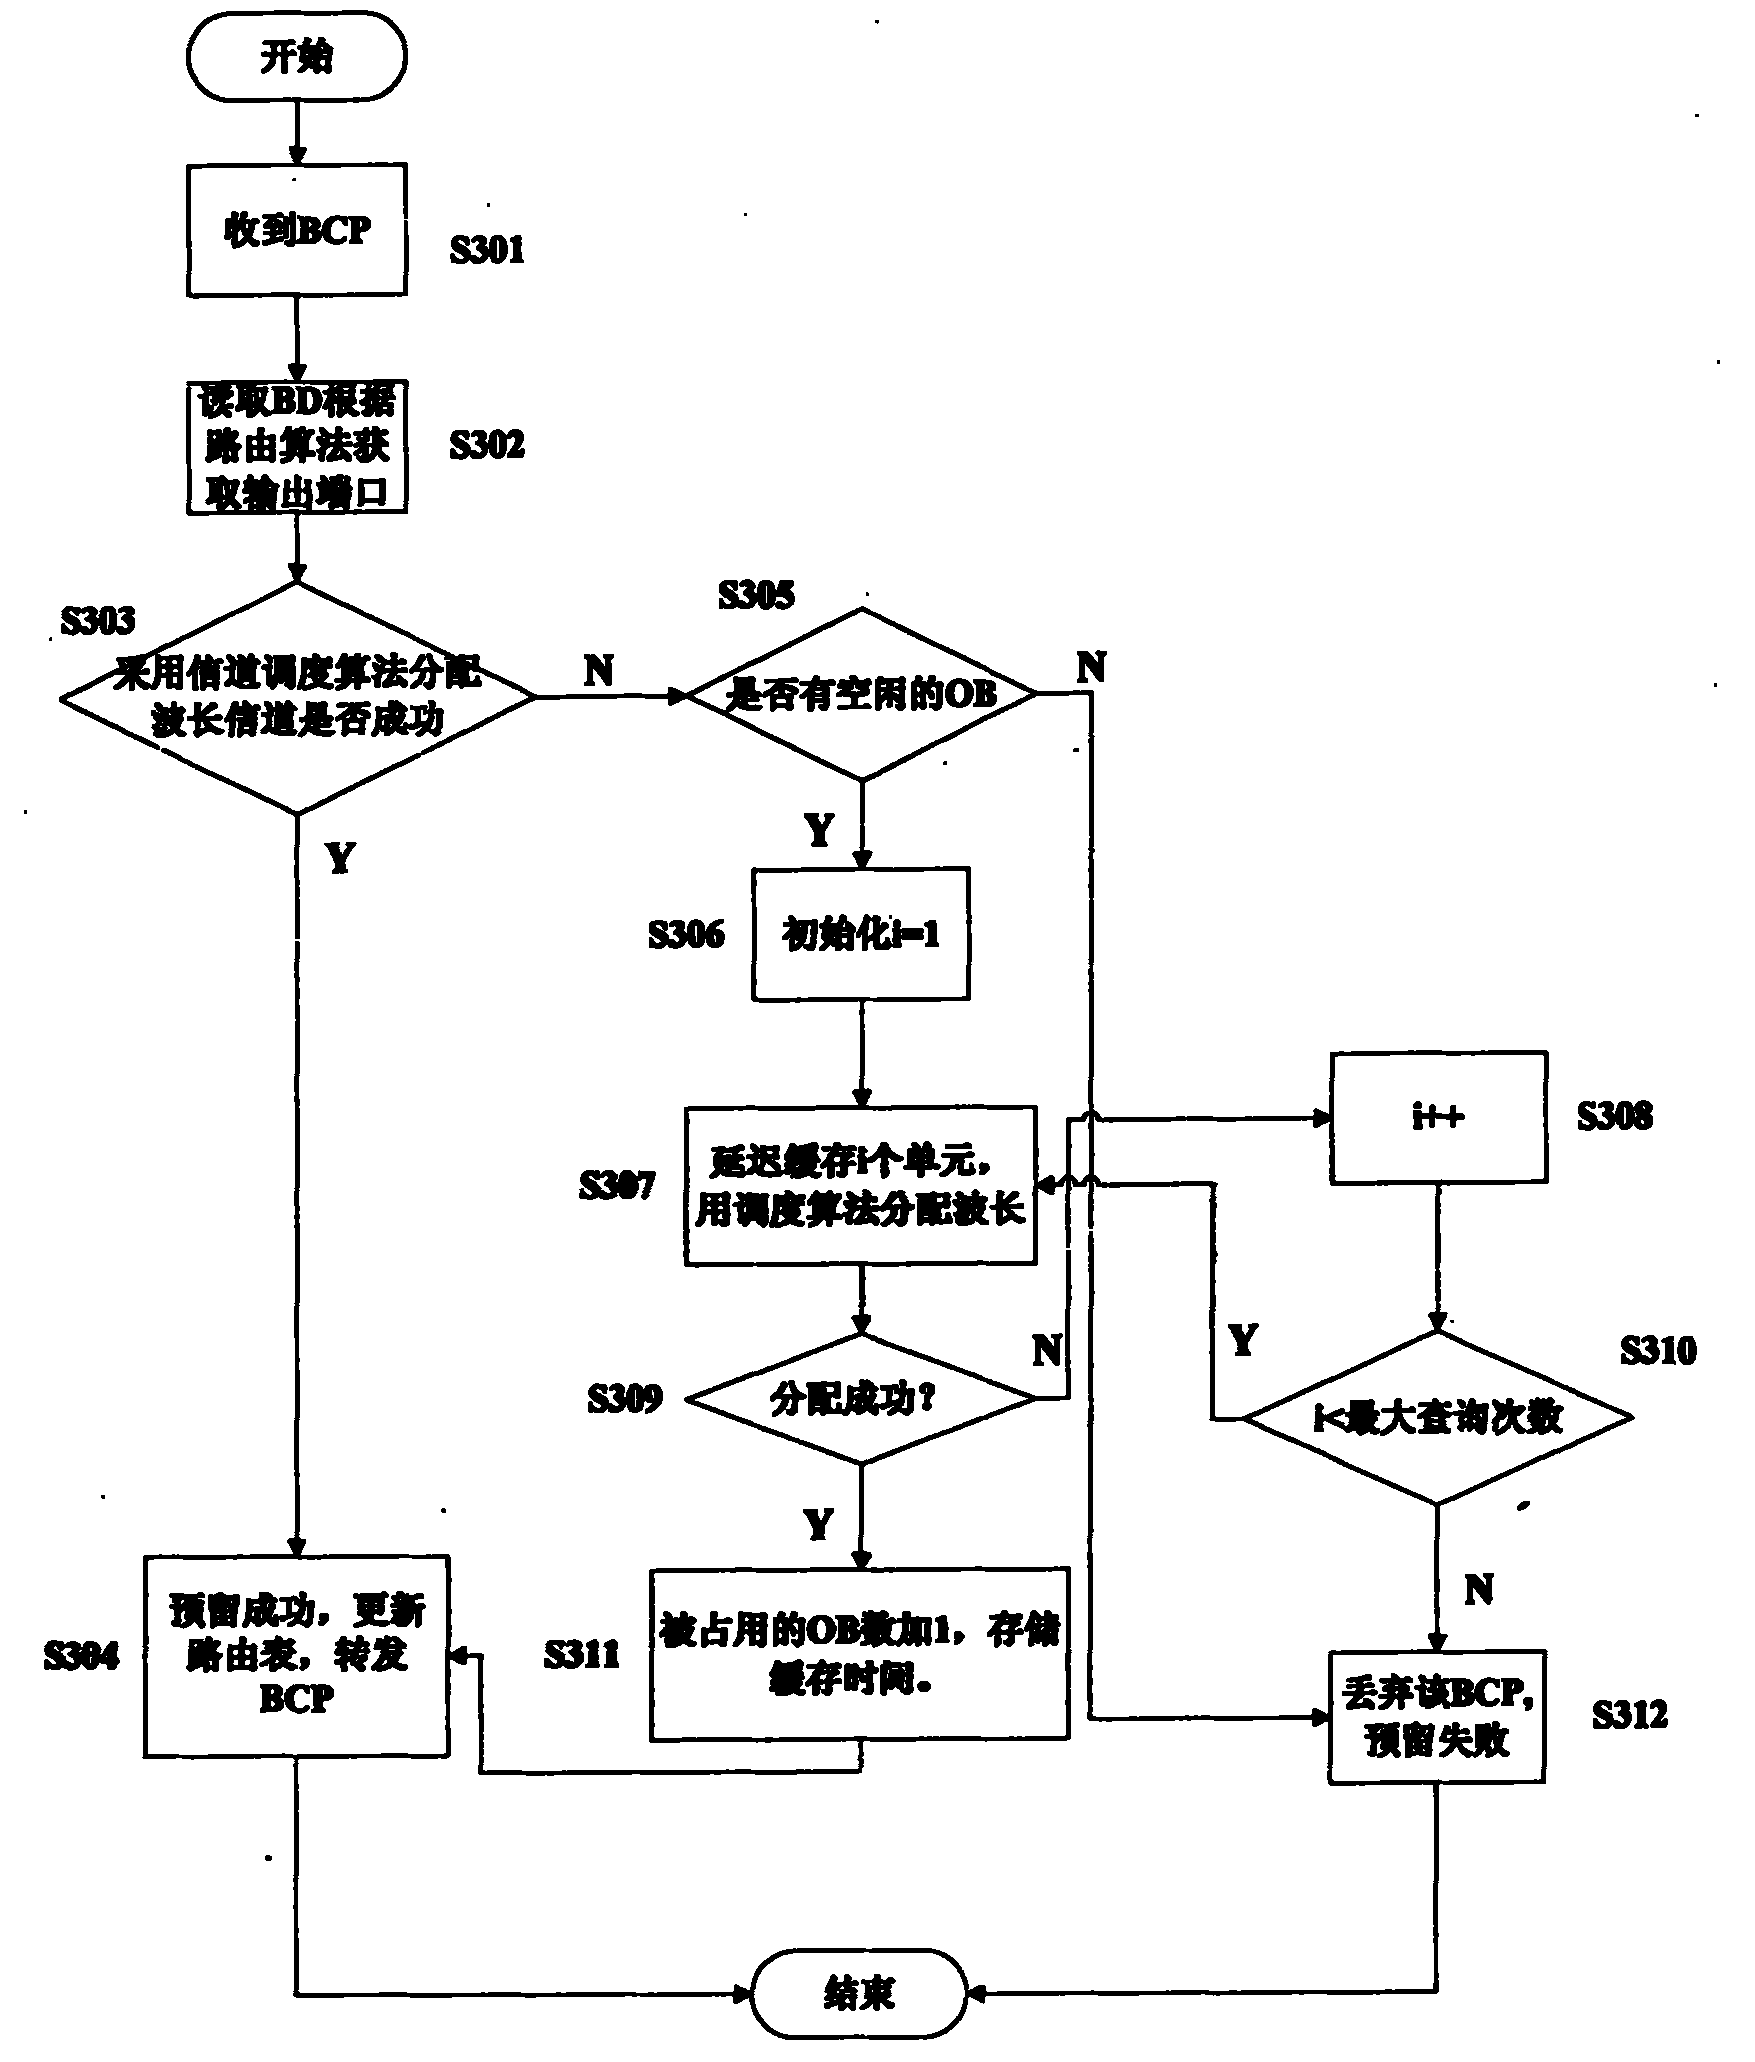 Optical burst switching (OBS) channel scheduling method based on optical buffer (OB)